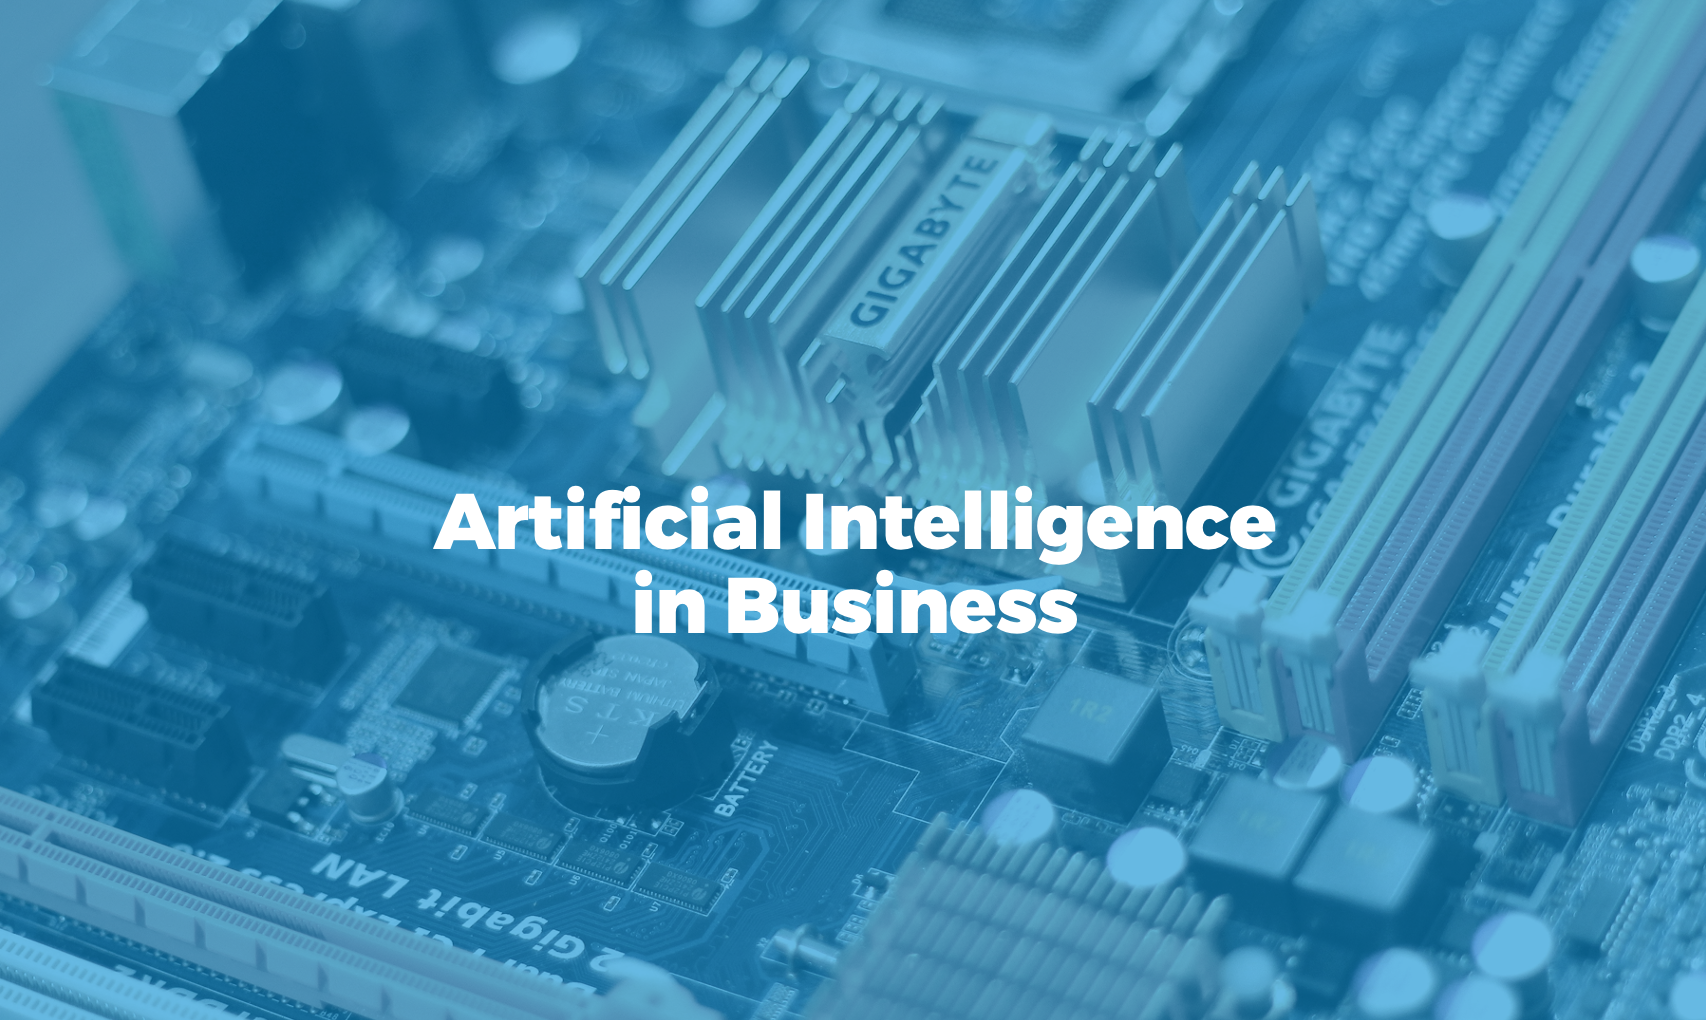 The Benefits of Artificial Intelligence in Business